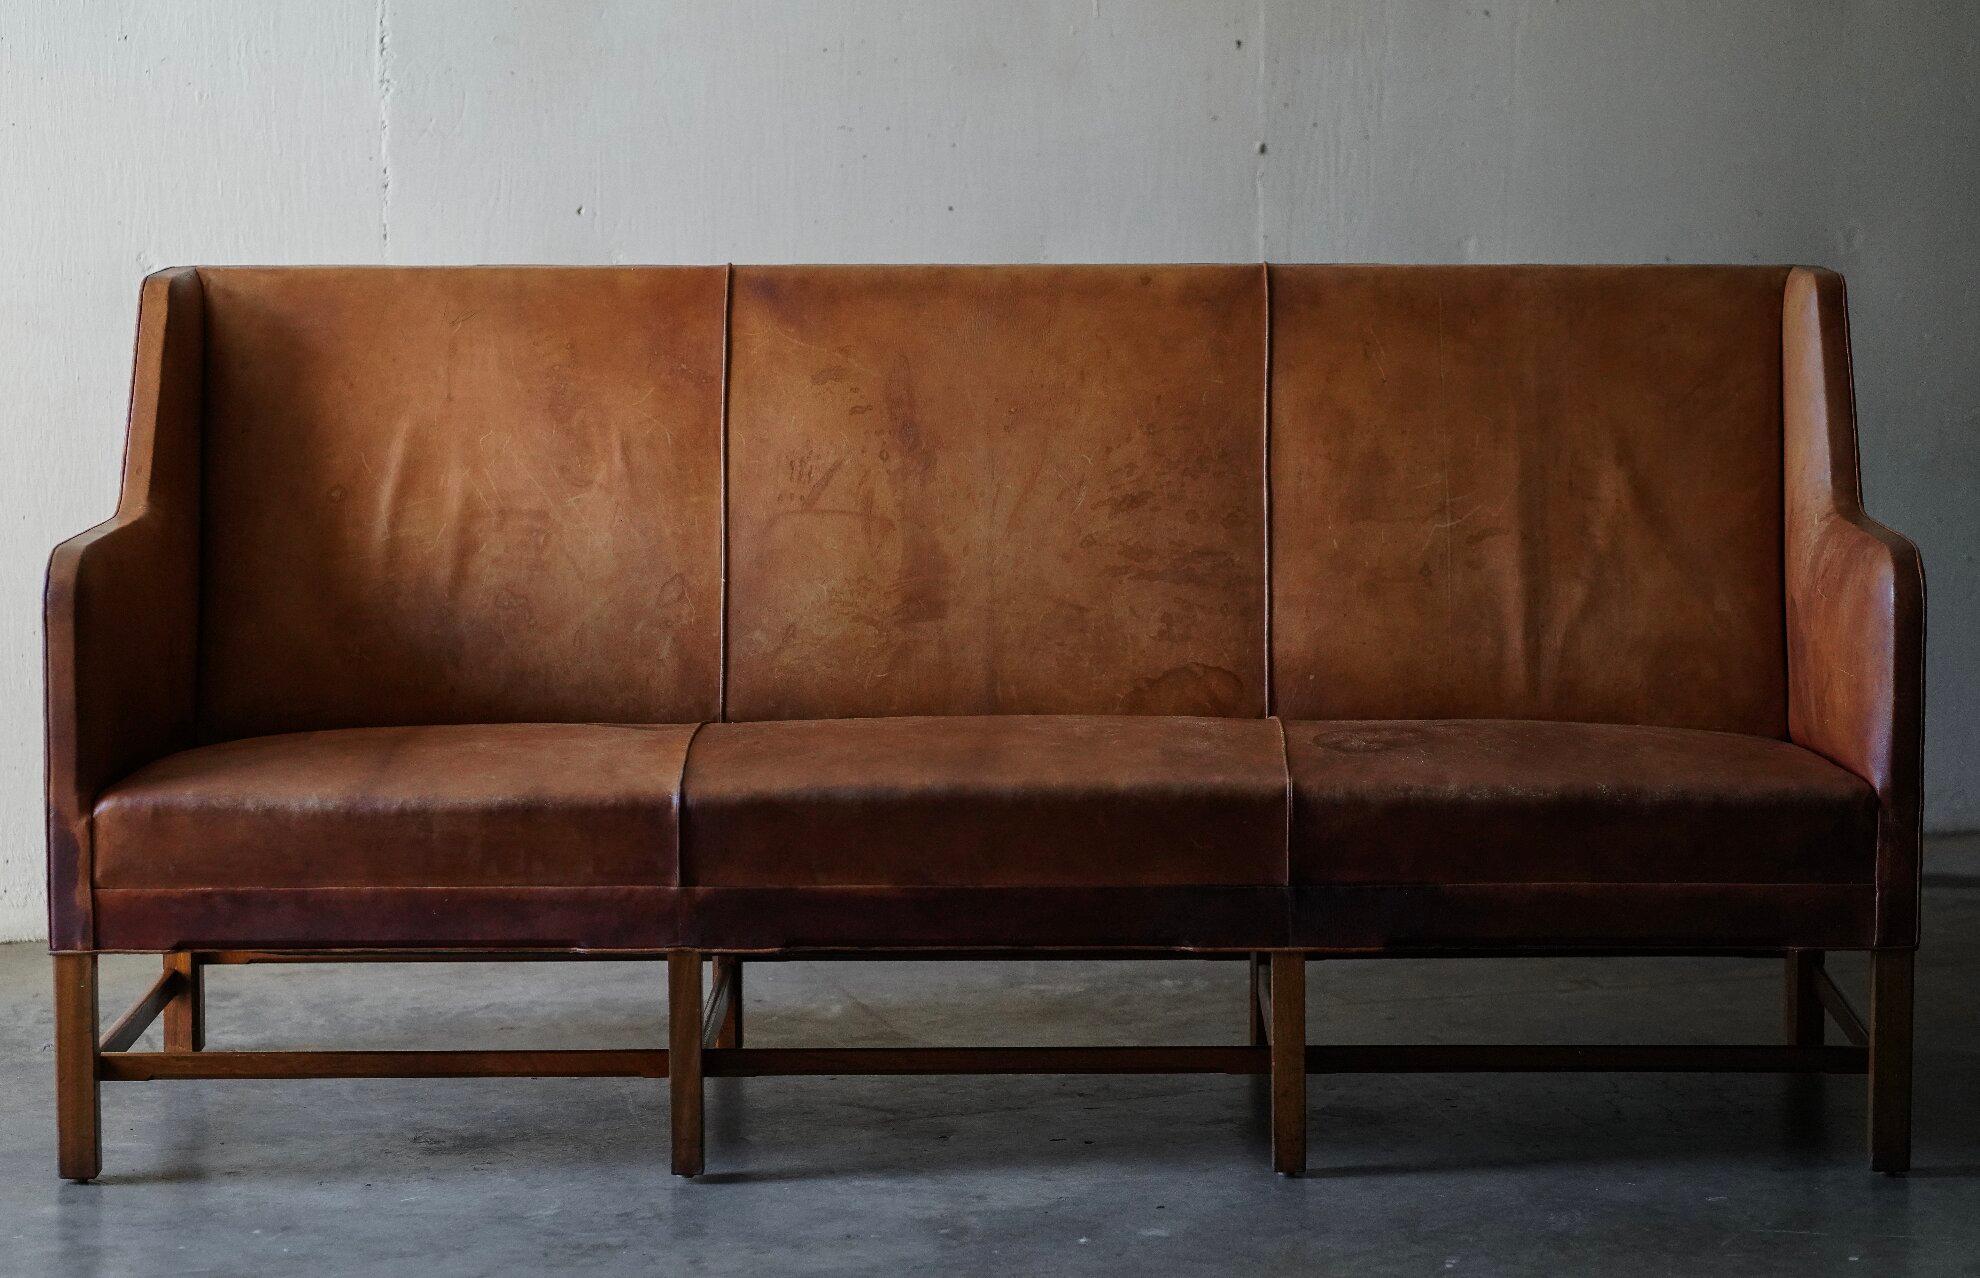 Kaare Klint 3-seater sofa model 5011 in original leather with amazing patina on a mahogany frame. Produced by cabinetmaker Rud Rasmussen - 1935.